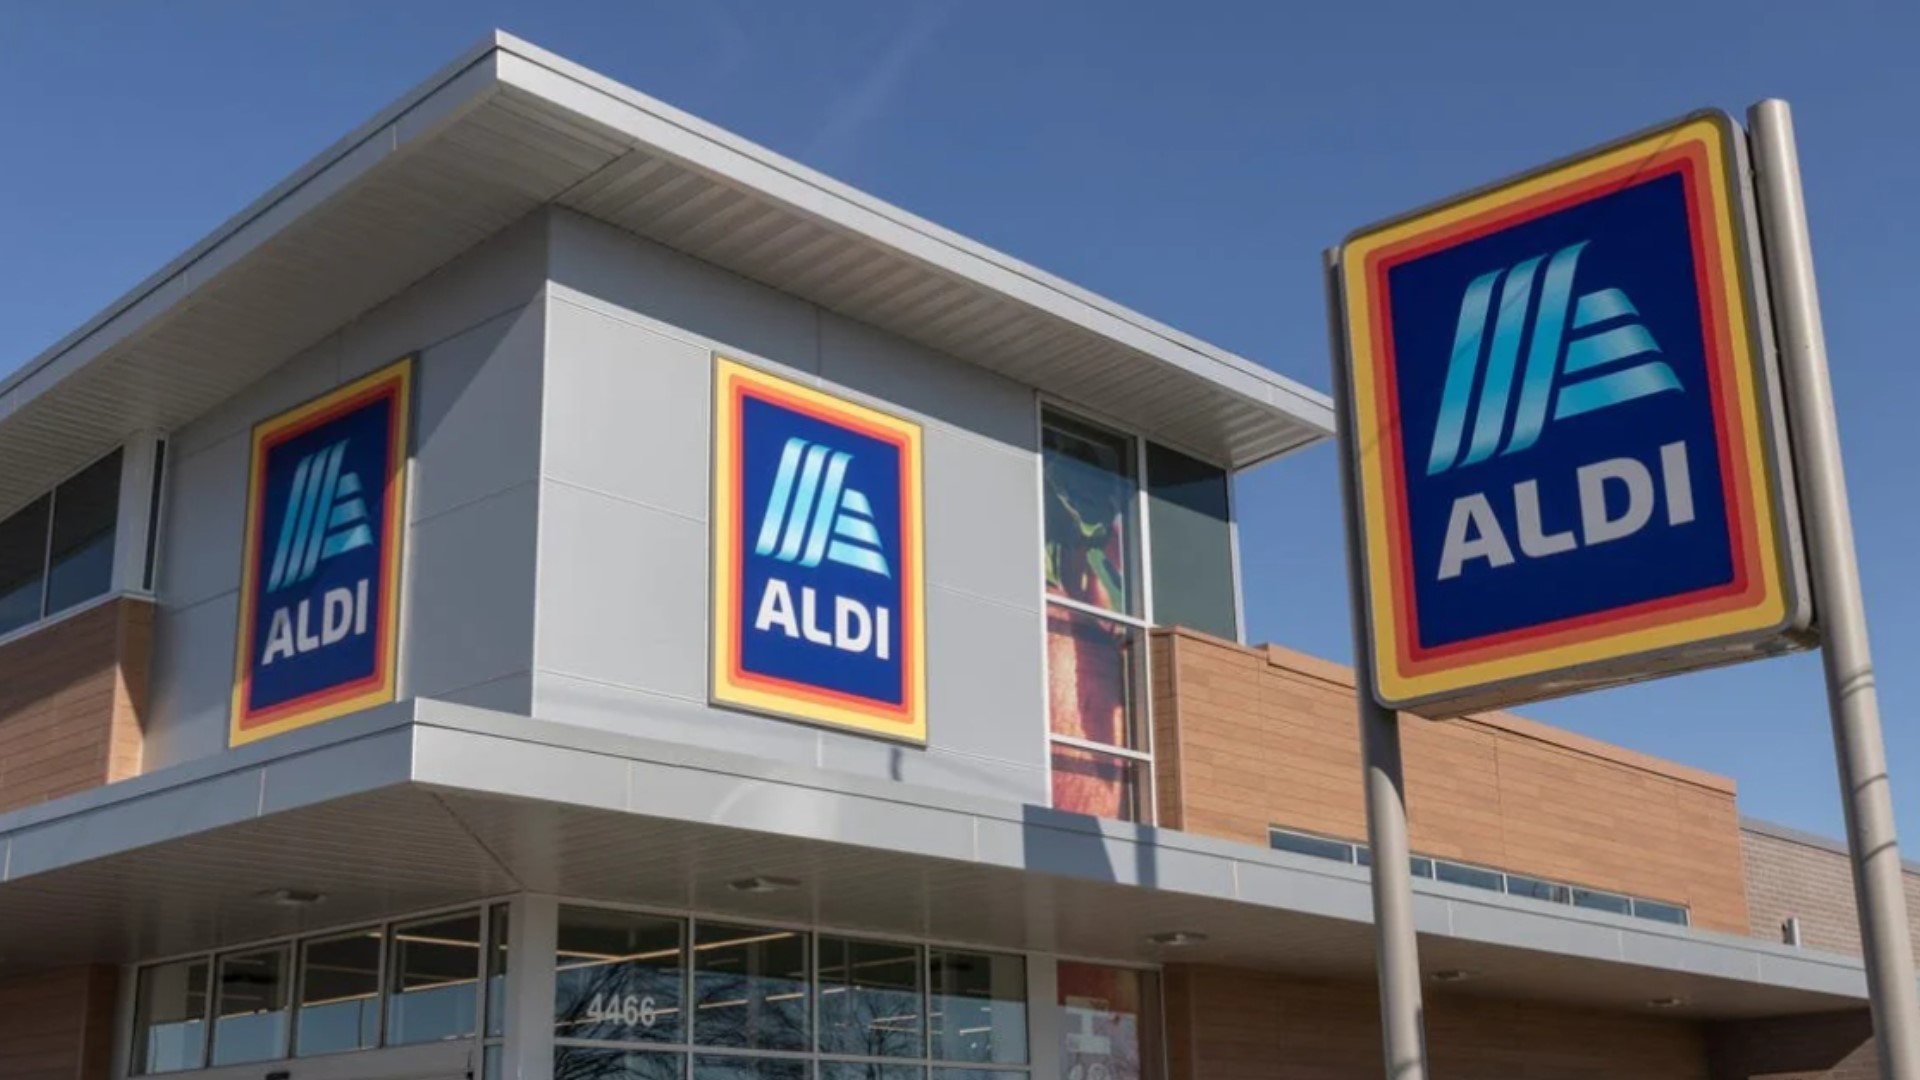 The Conway community is gearing up for the grand opening of a new grocery store as the first ALDI location opens in the city on January 25.